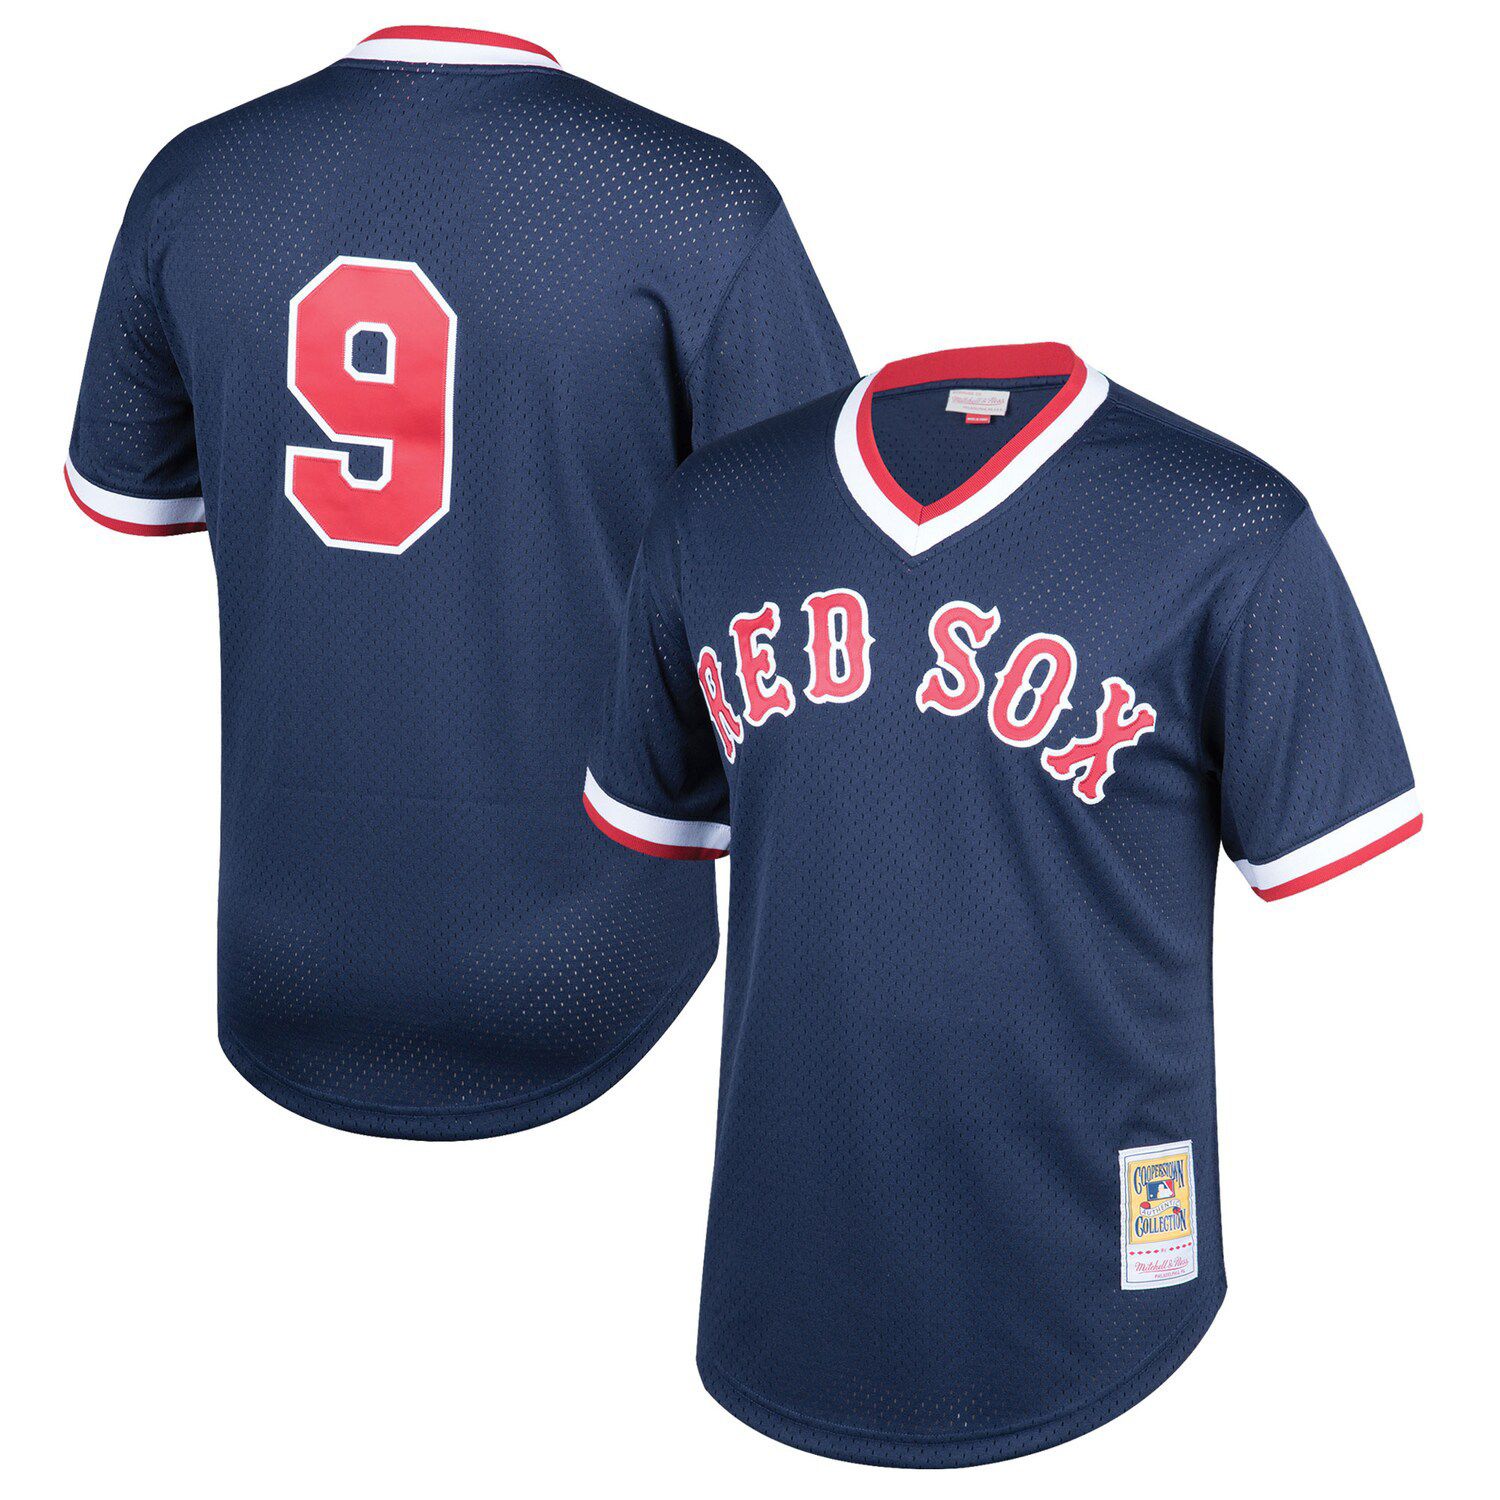 Mitchell & Ness Authentic Nomar Garciaparra Boston Red Sox 1997 BP Jersey